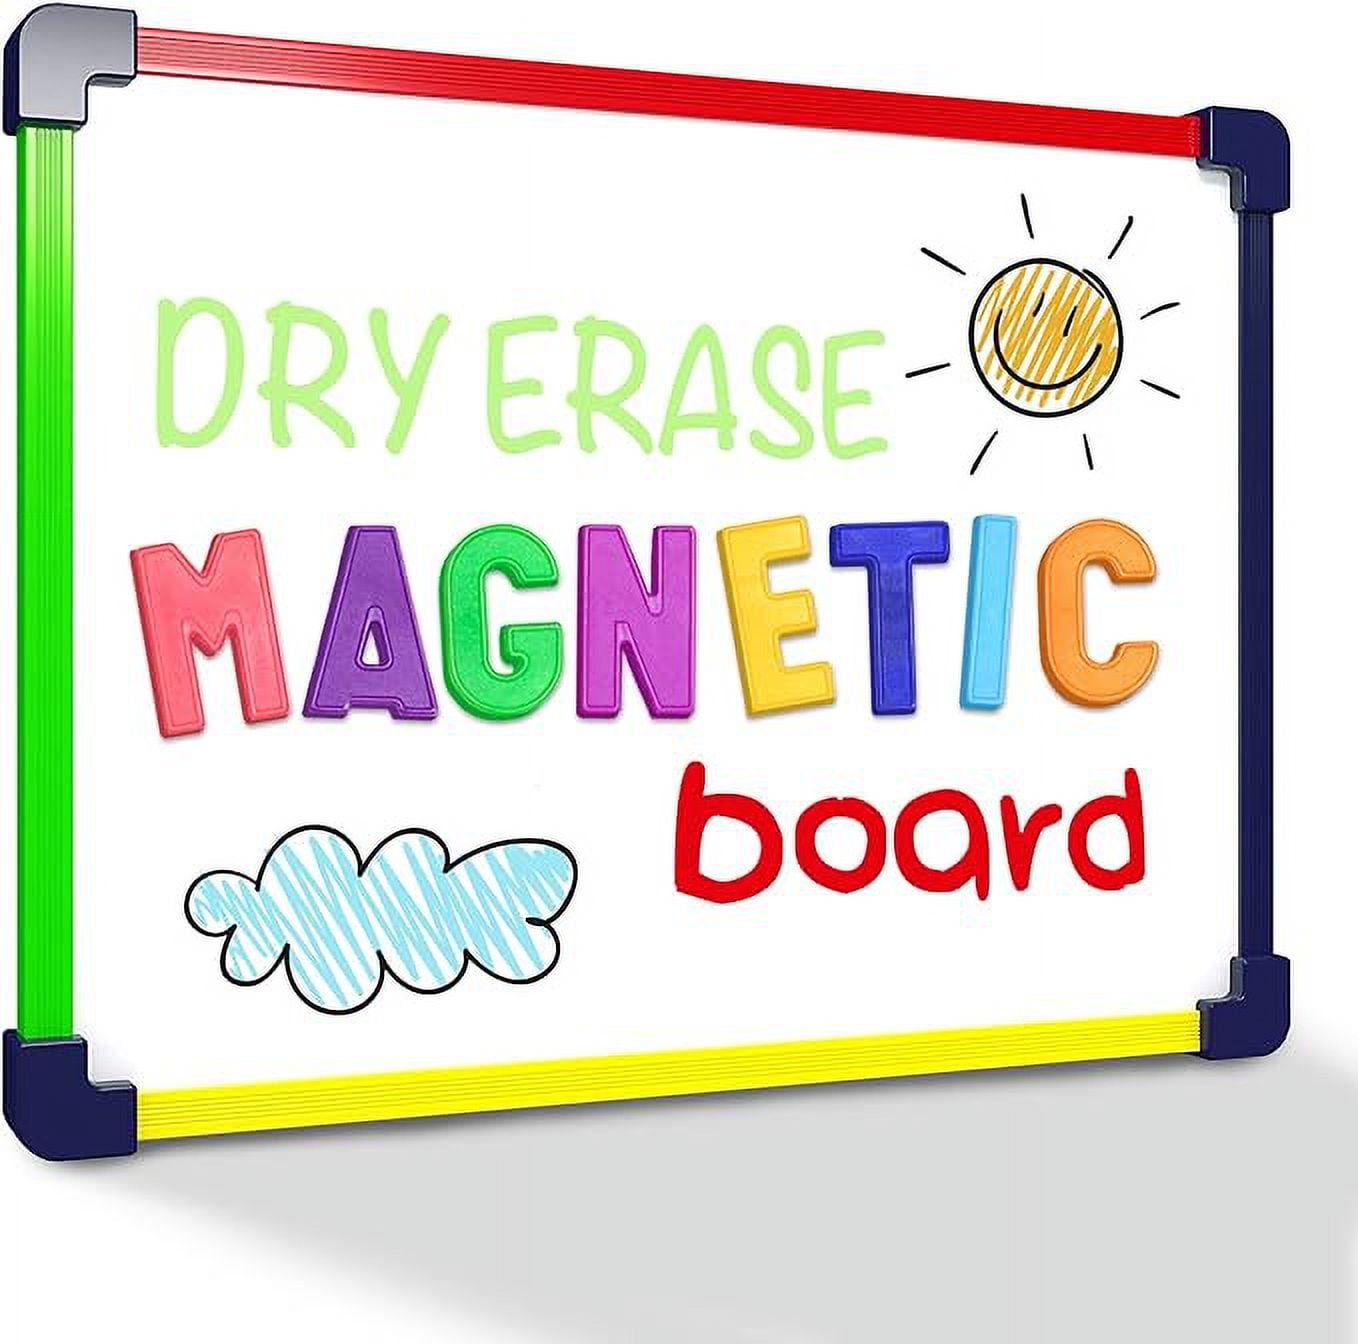 Nicpro Dry Erase Whiteboard, 12 x 16 inch Double Sided Large Magnetic